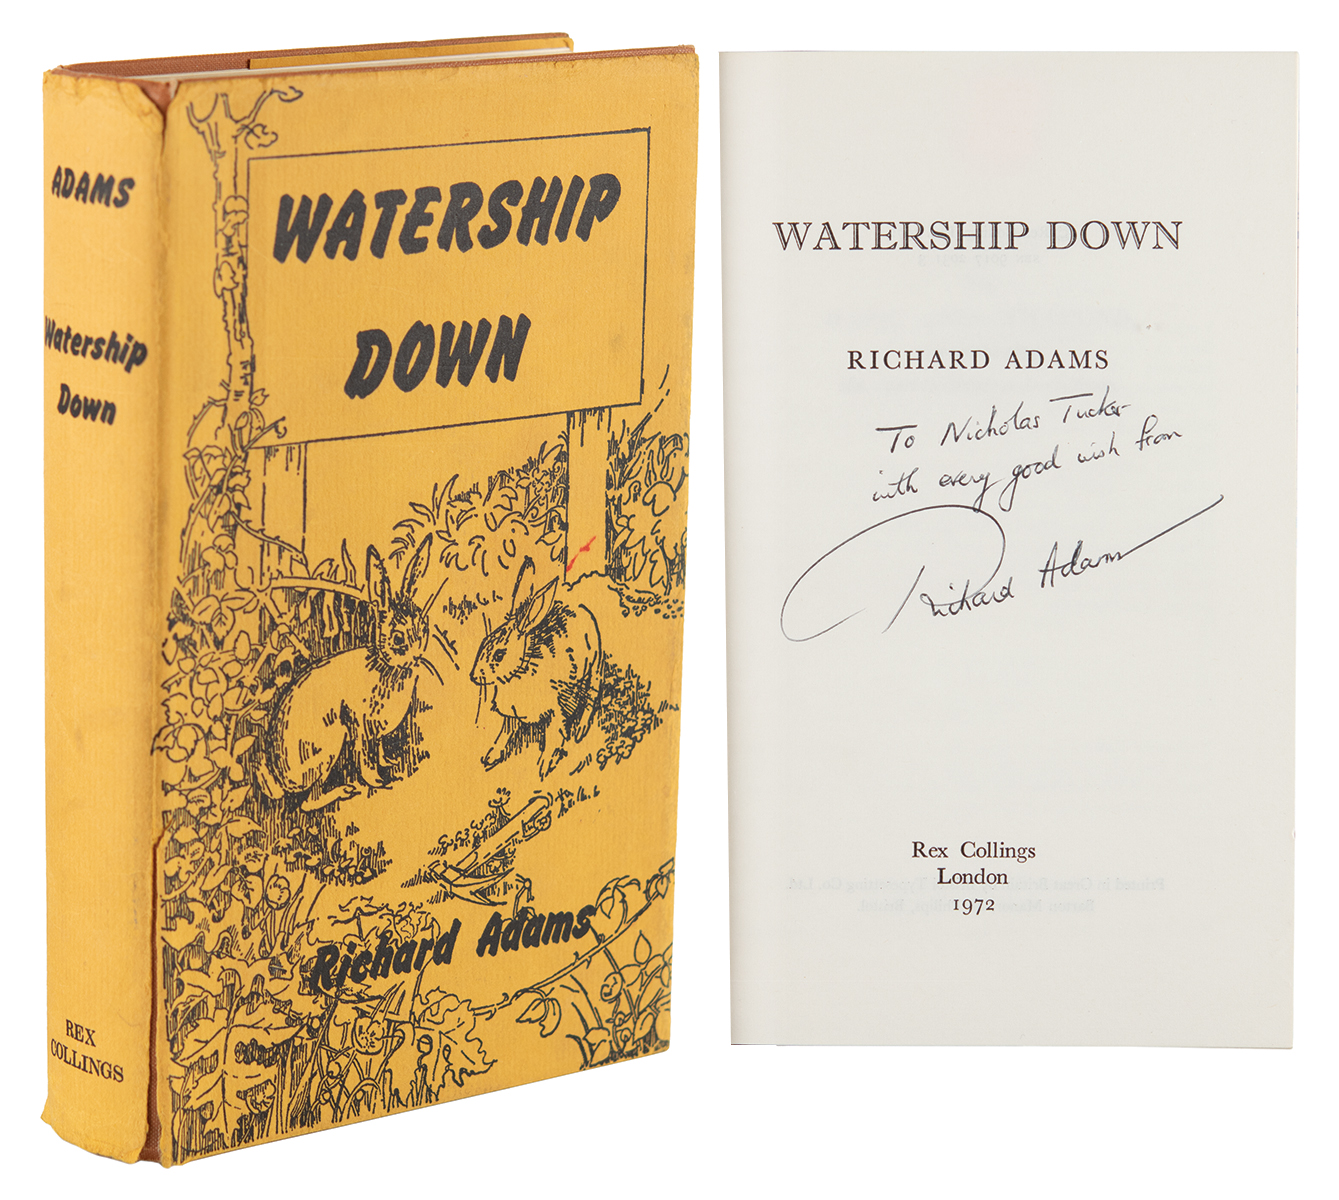 Lot #358 Richard Adams Signed Book and (2) Autograph Letters Signed - Image 1